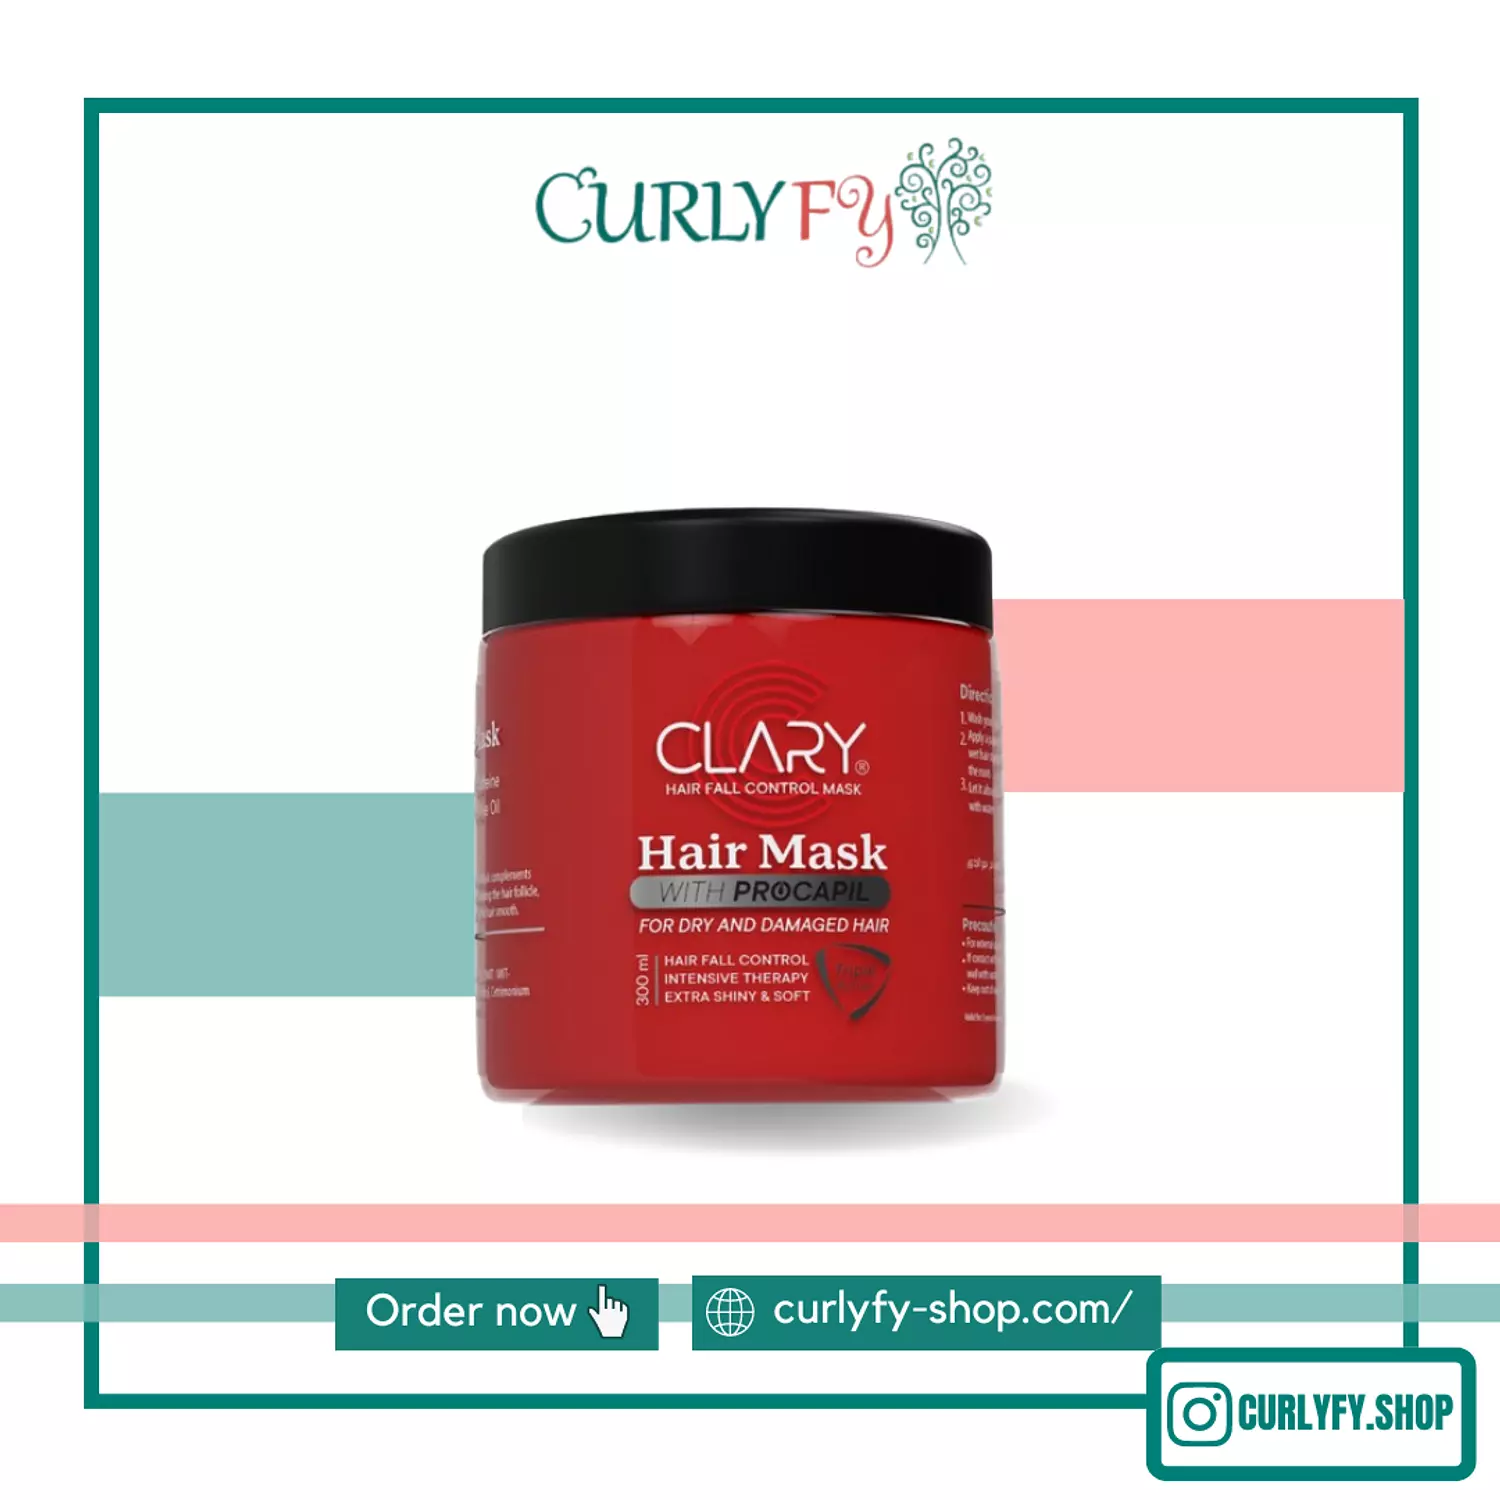 Clary hair mask hover image